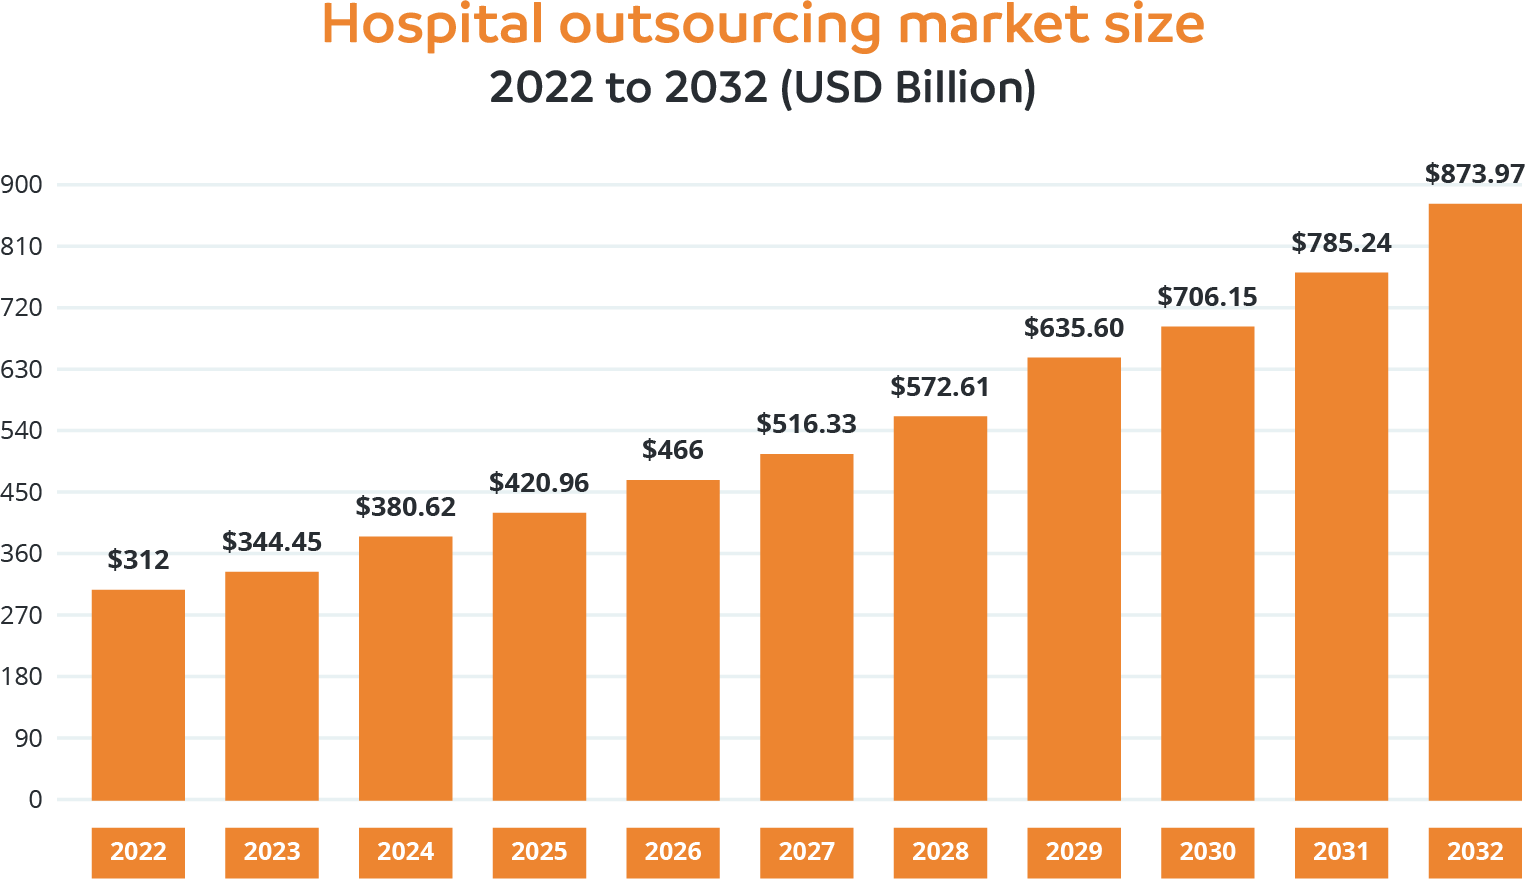 Hospital outsourcing market size 2022 to 2032